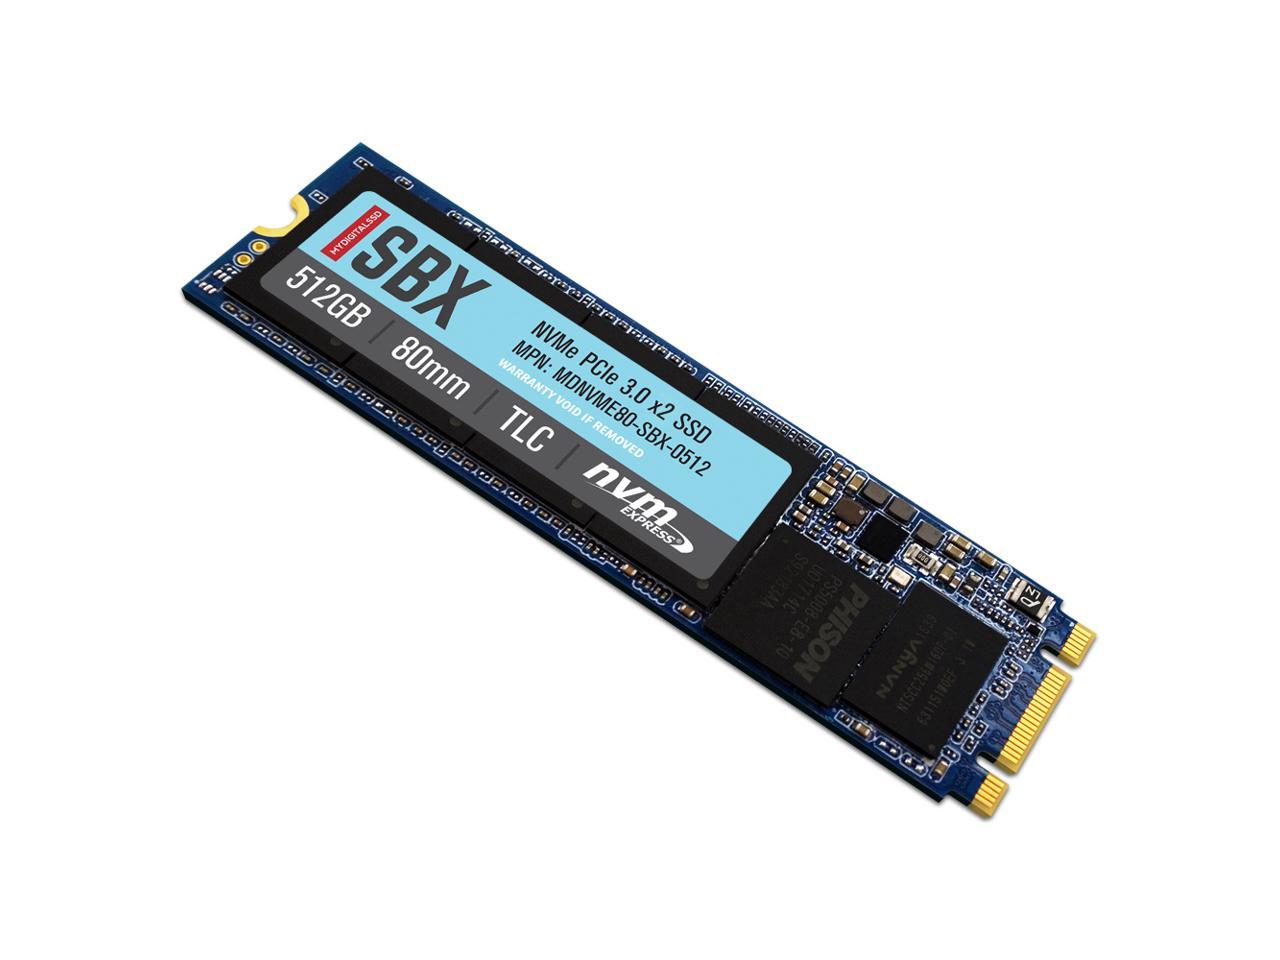 MZ-VLB1T0B ASHATA PCI-E Nvme Adapter PCI-E SSD,PM981a Nvme m.2 2280 PCI-E Solid State Drive High Speed 3500MB/S Reading 3000MB/S Writing 